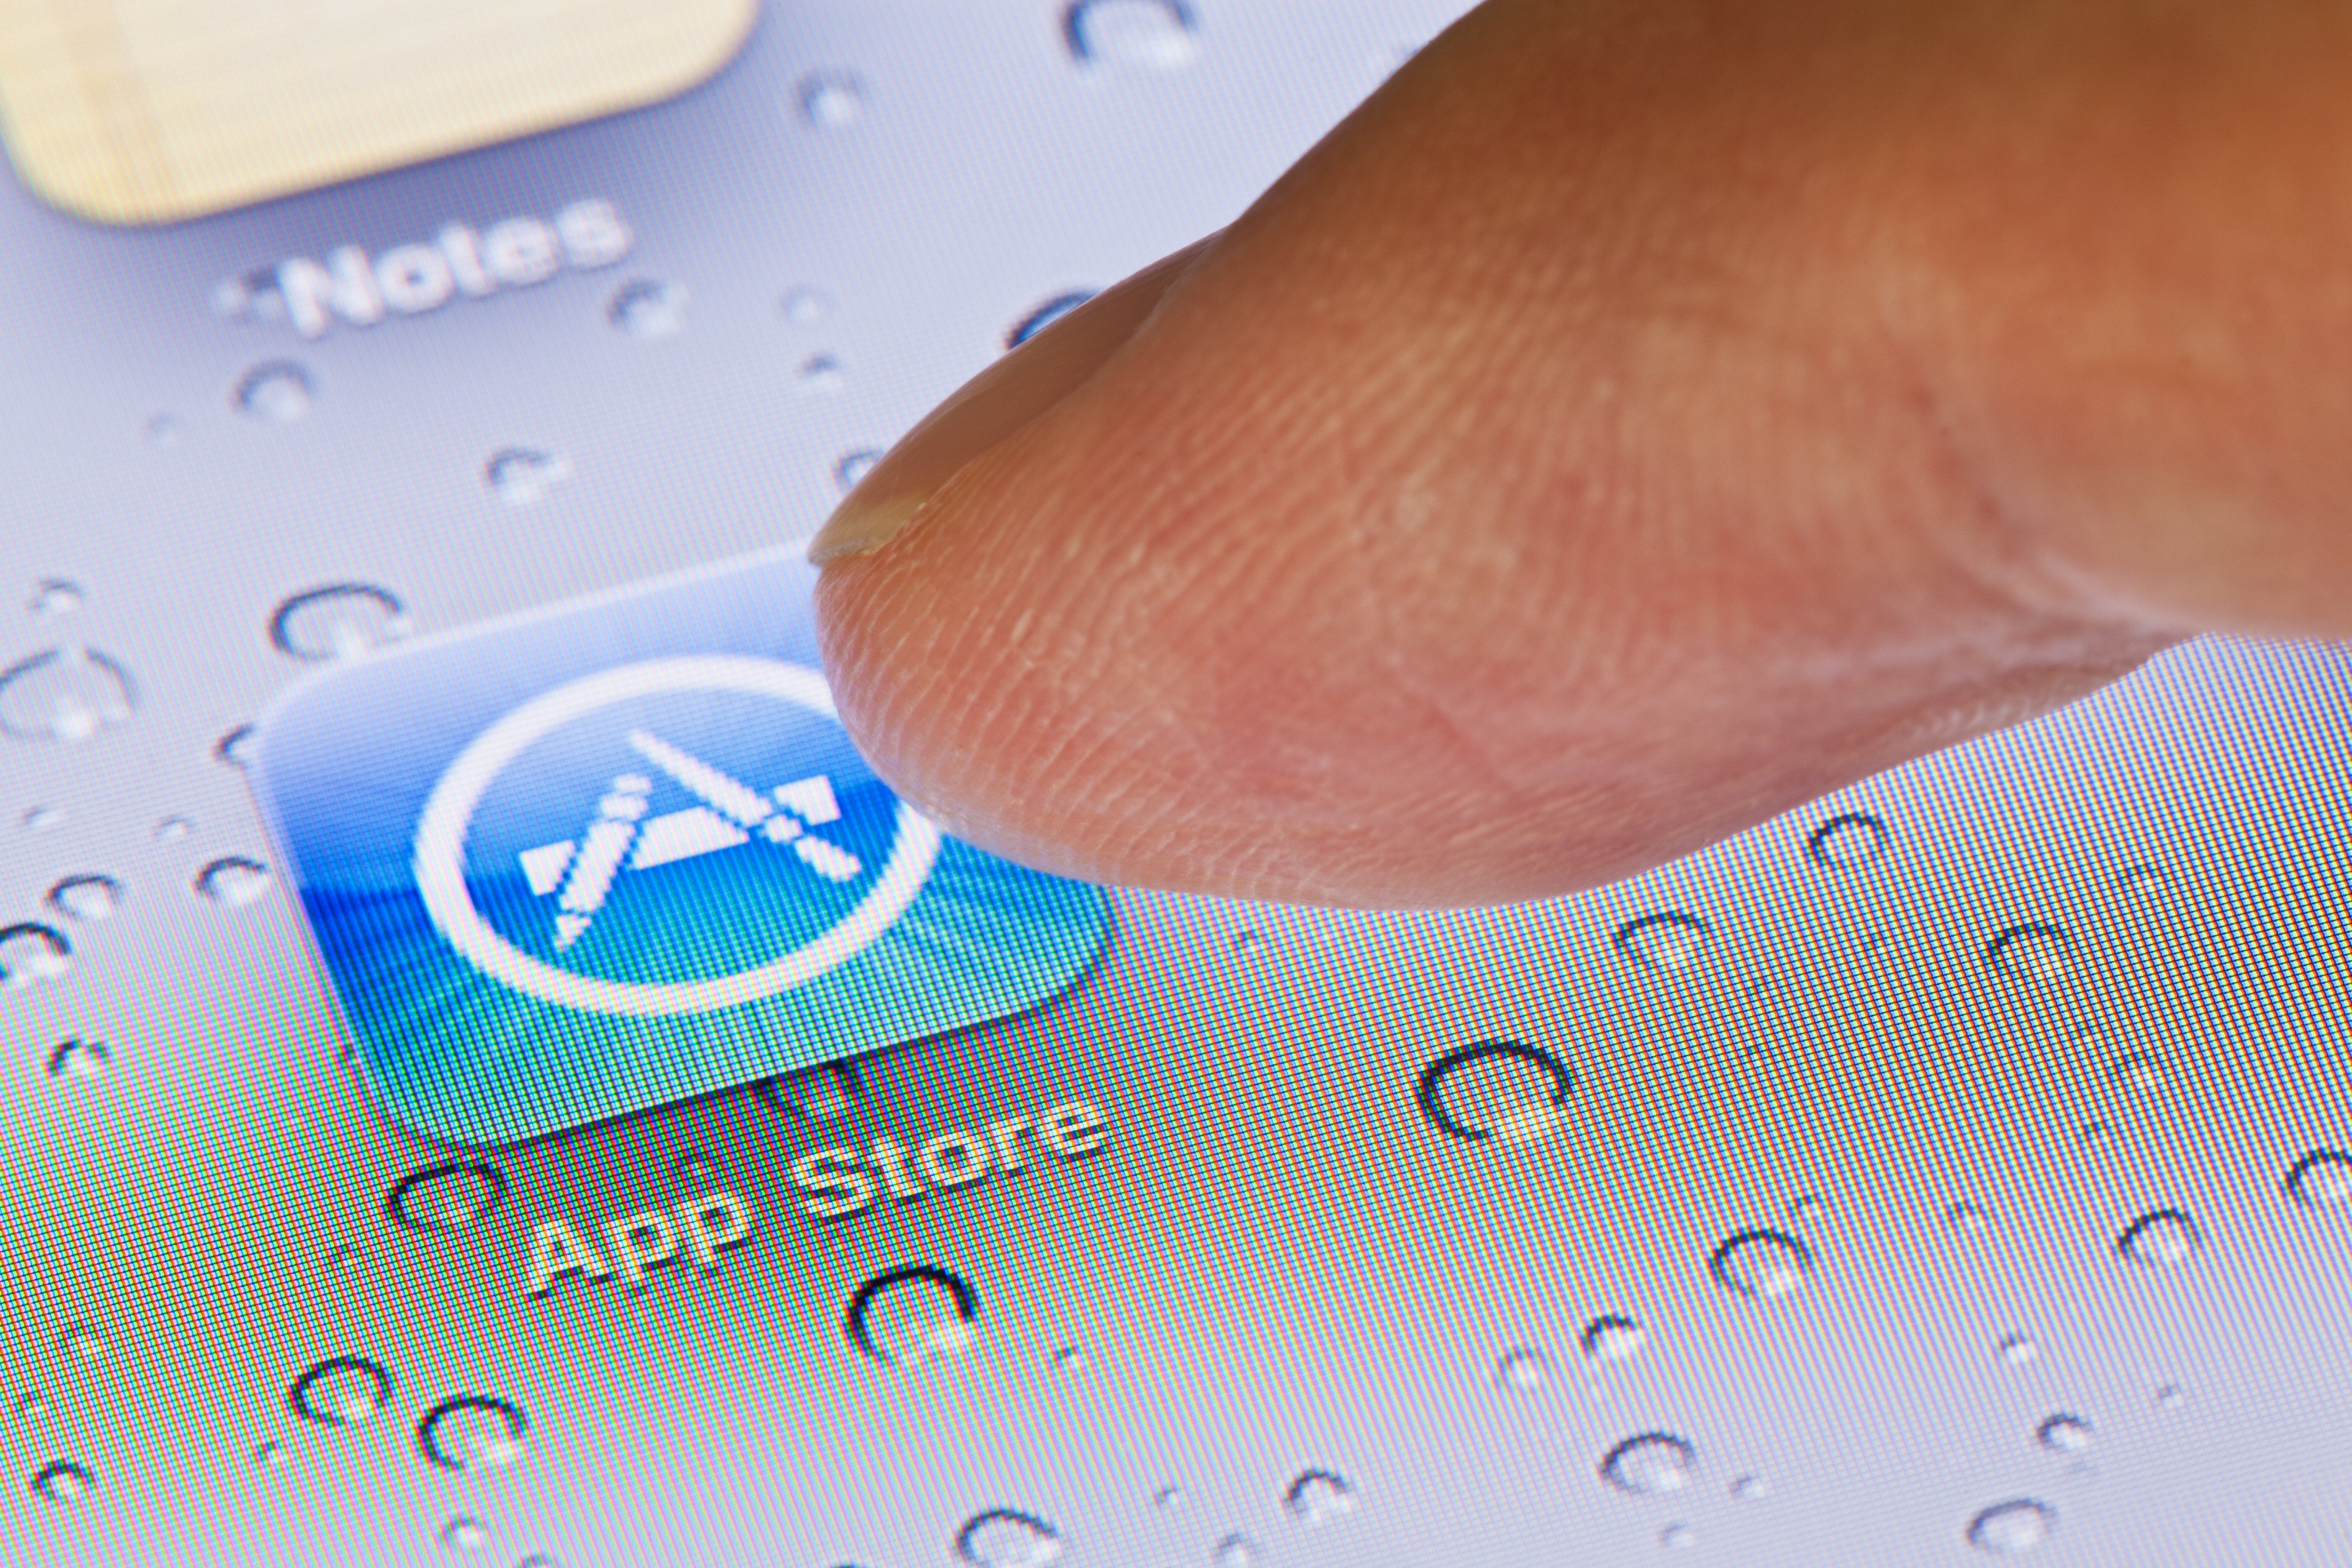 Apple’s China App Store has already been under scrutiny on the mainland after local regulations were updated last year. Photo: Shutterstock